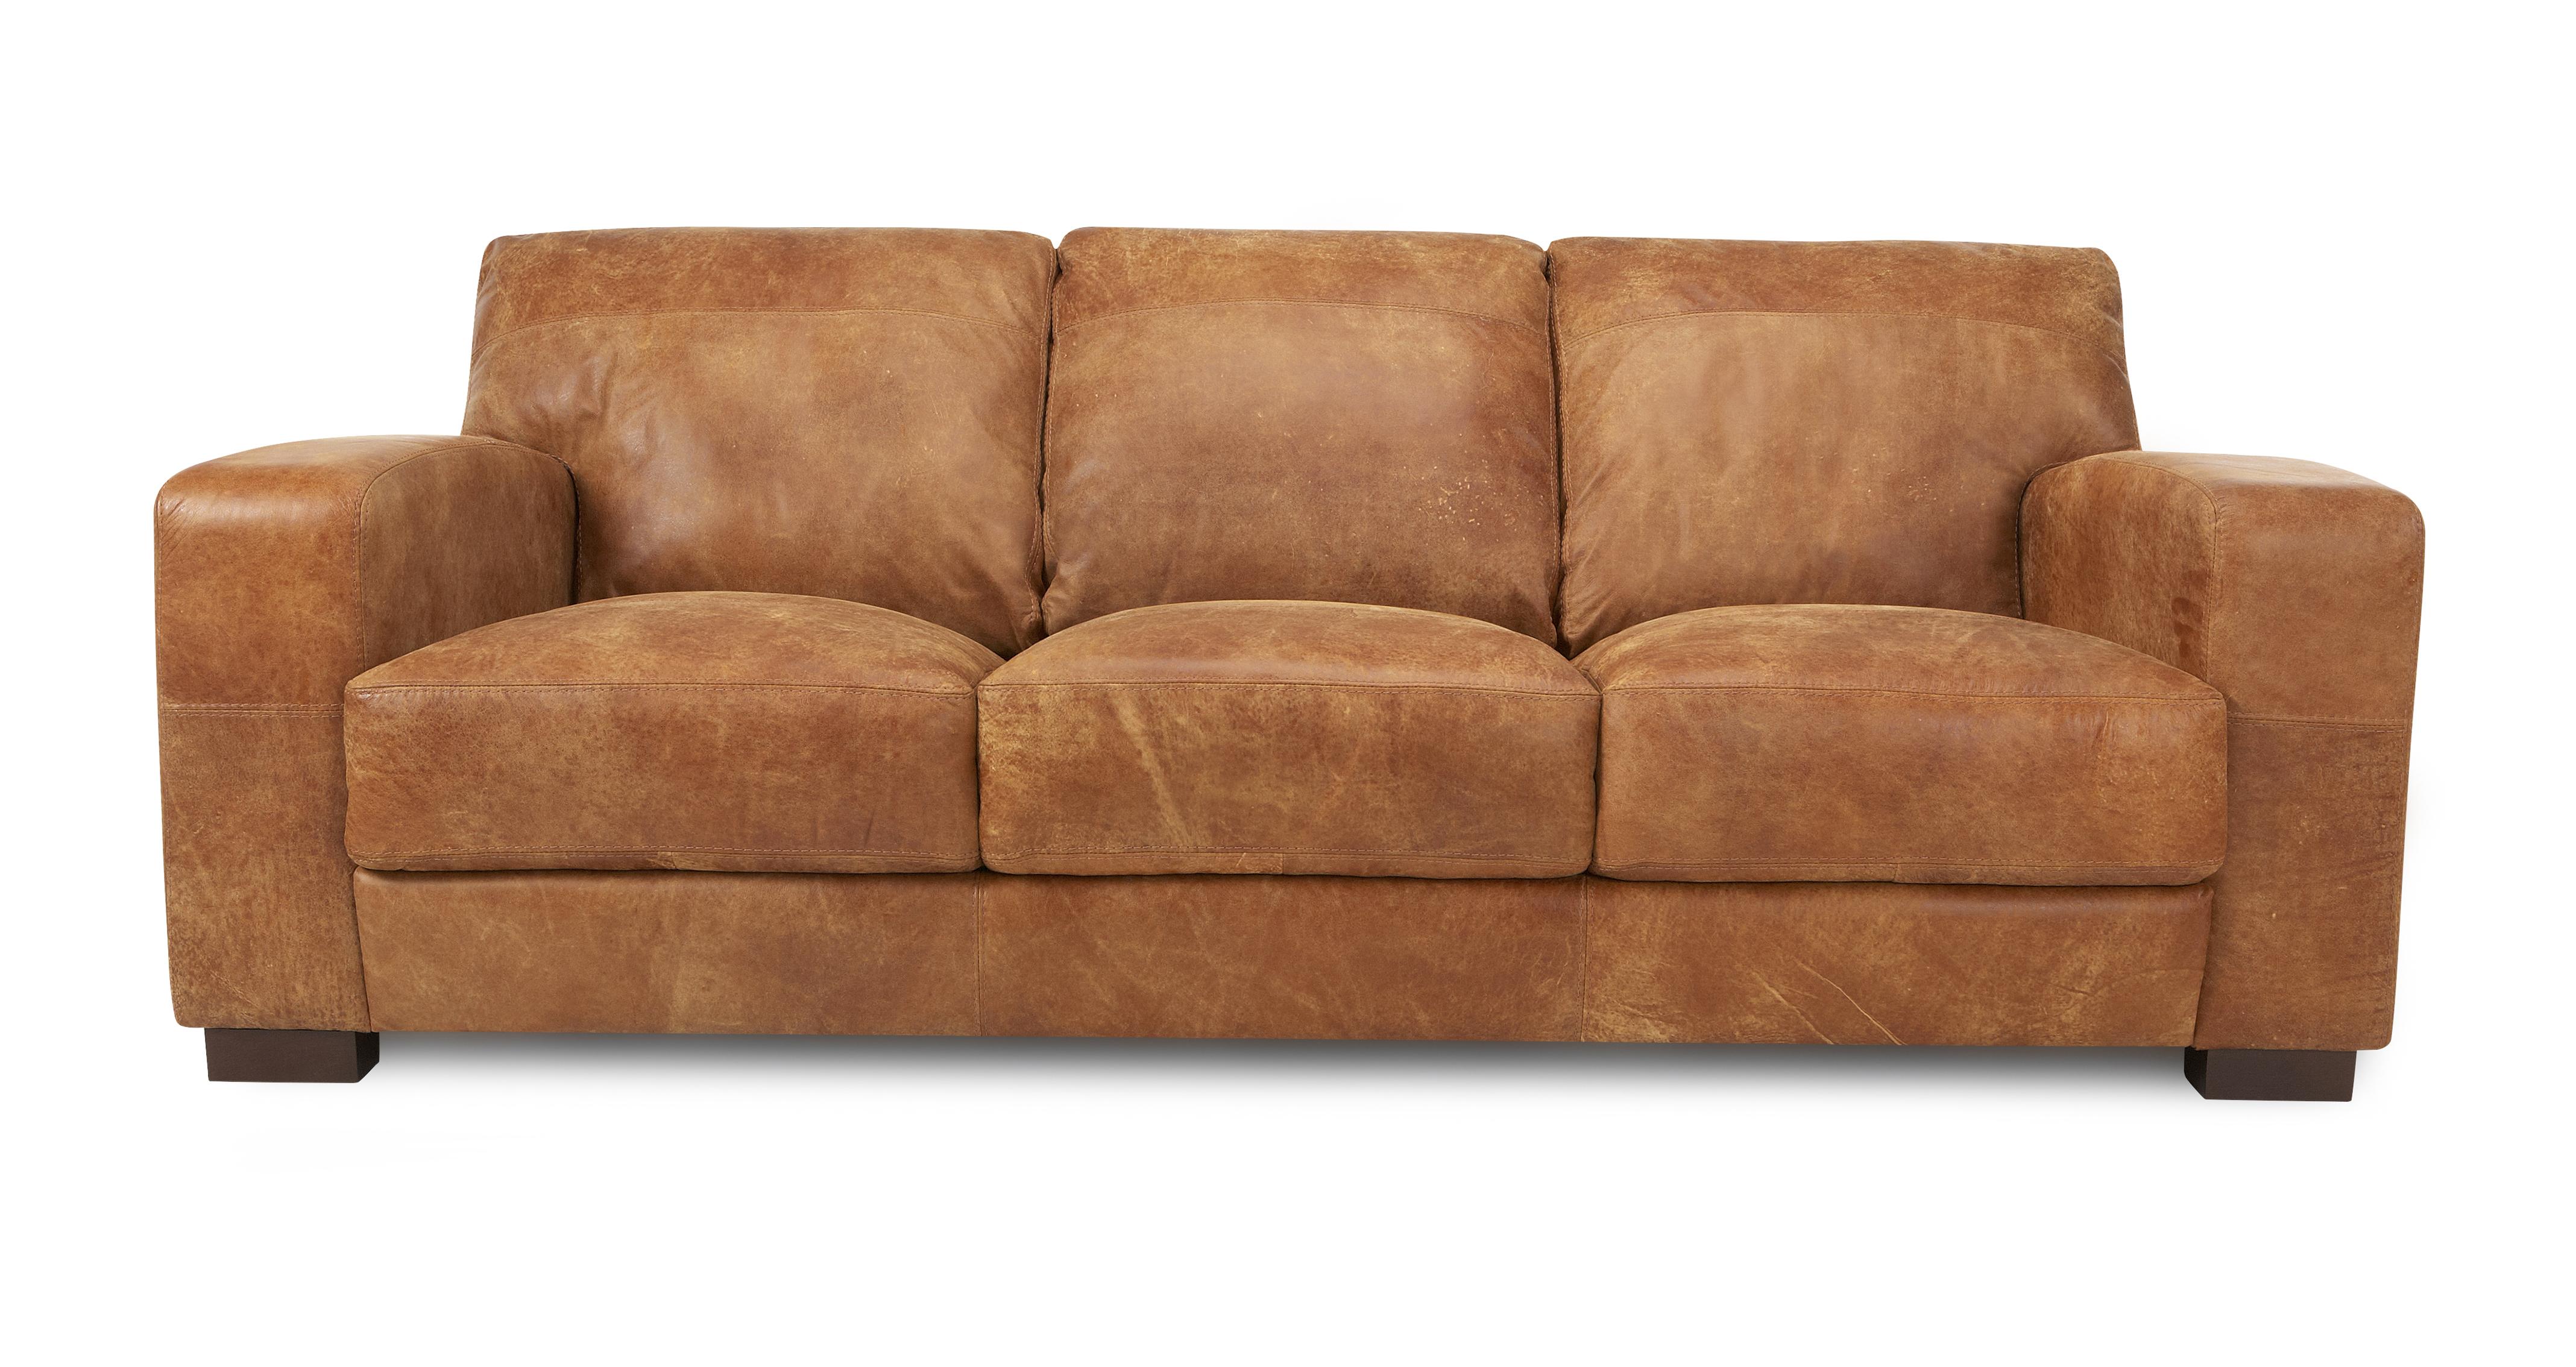 dfs brown leather sofa